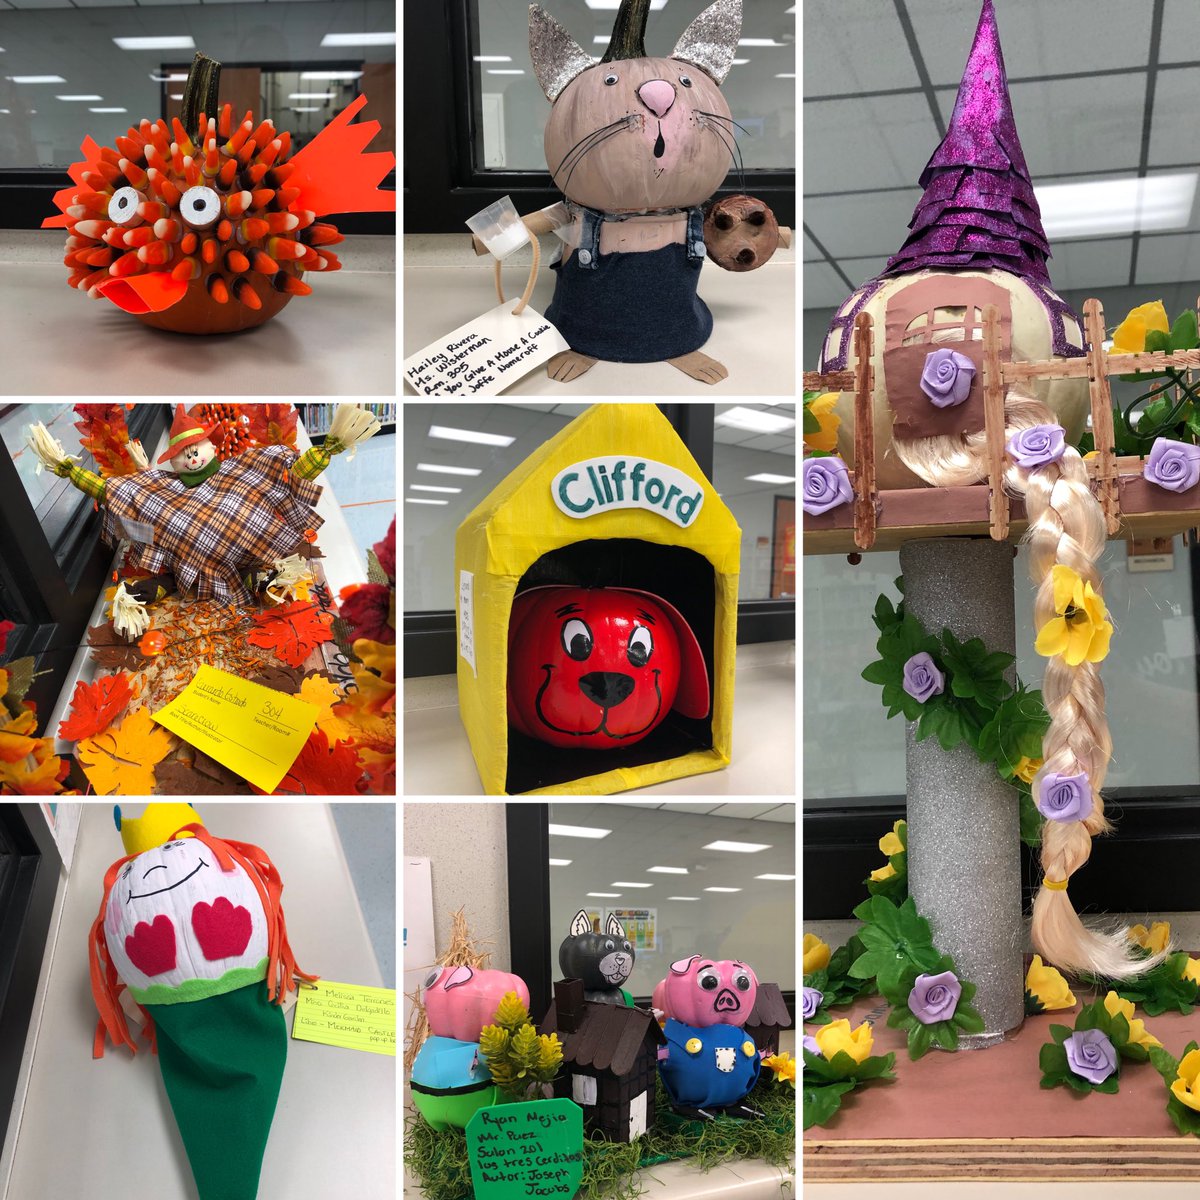 GL’s Book Character Pumpkin Decorating Contest was a success. It was hard to choose just one winner so we had 7 winners. @AldineISD #KeepShiningGL